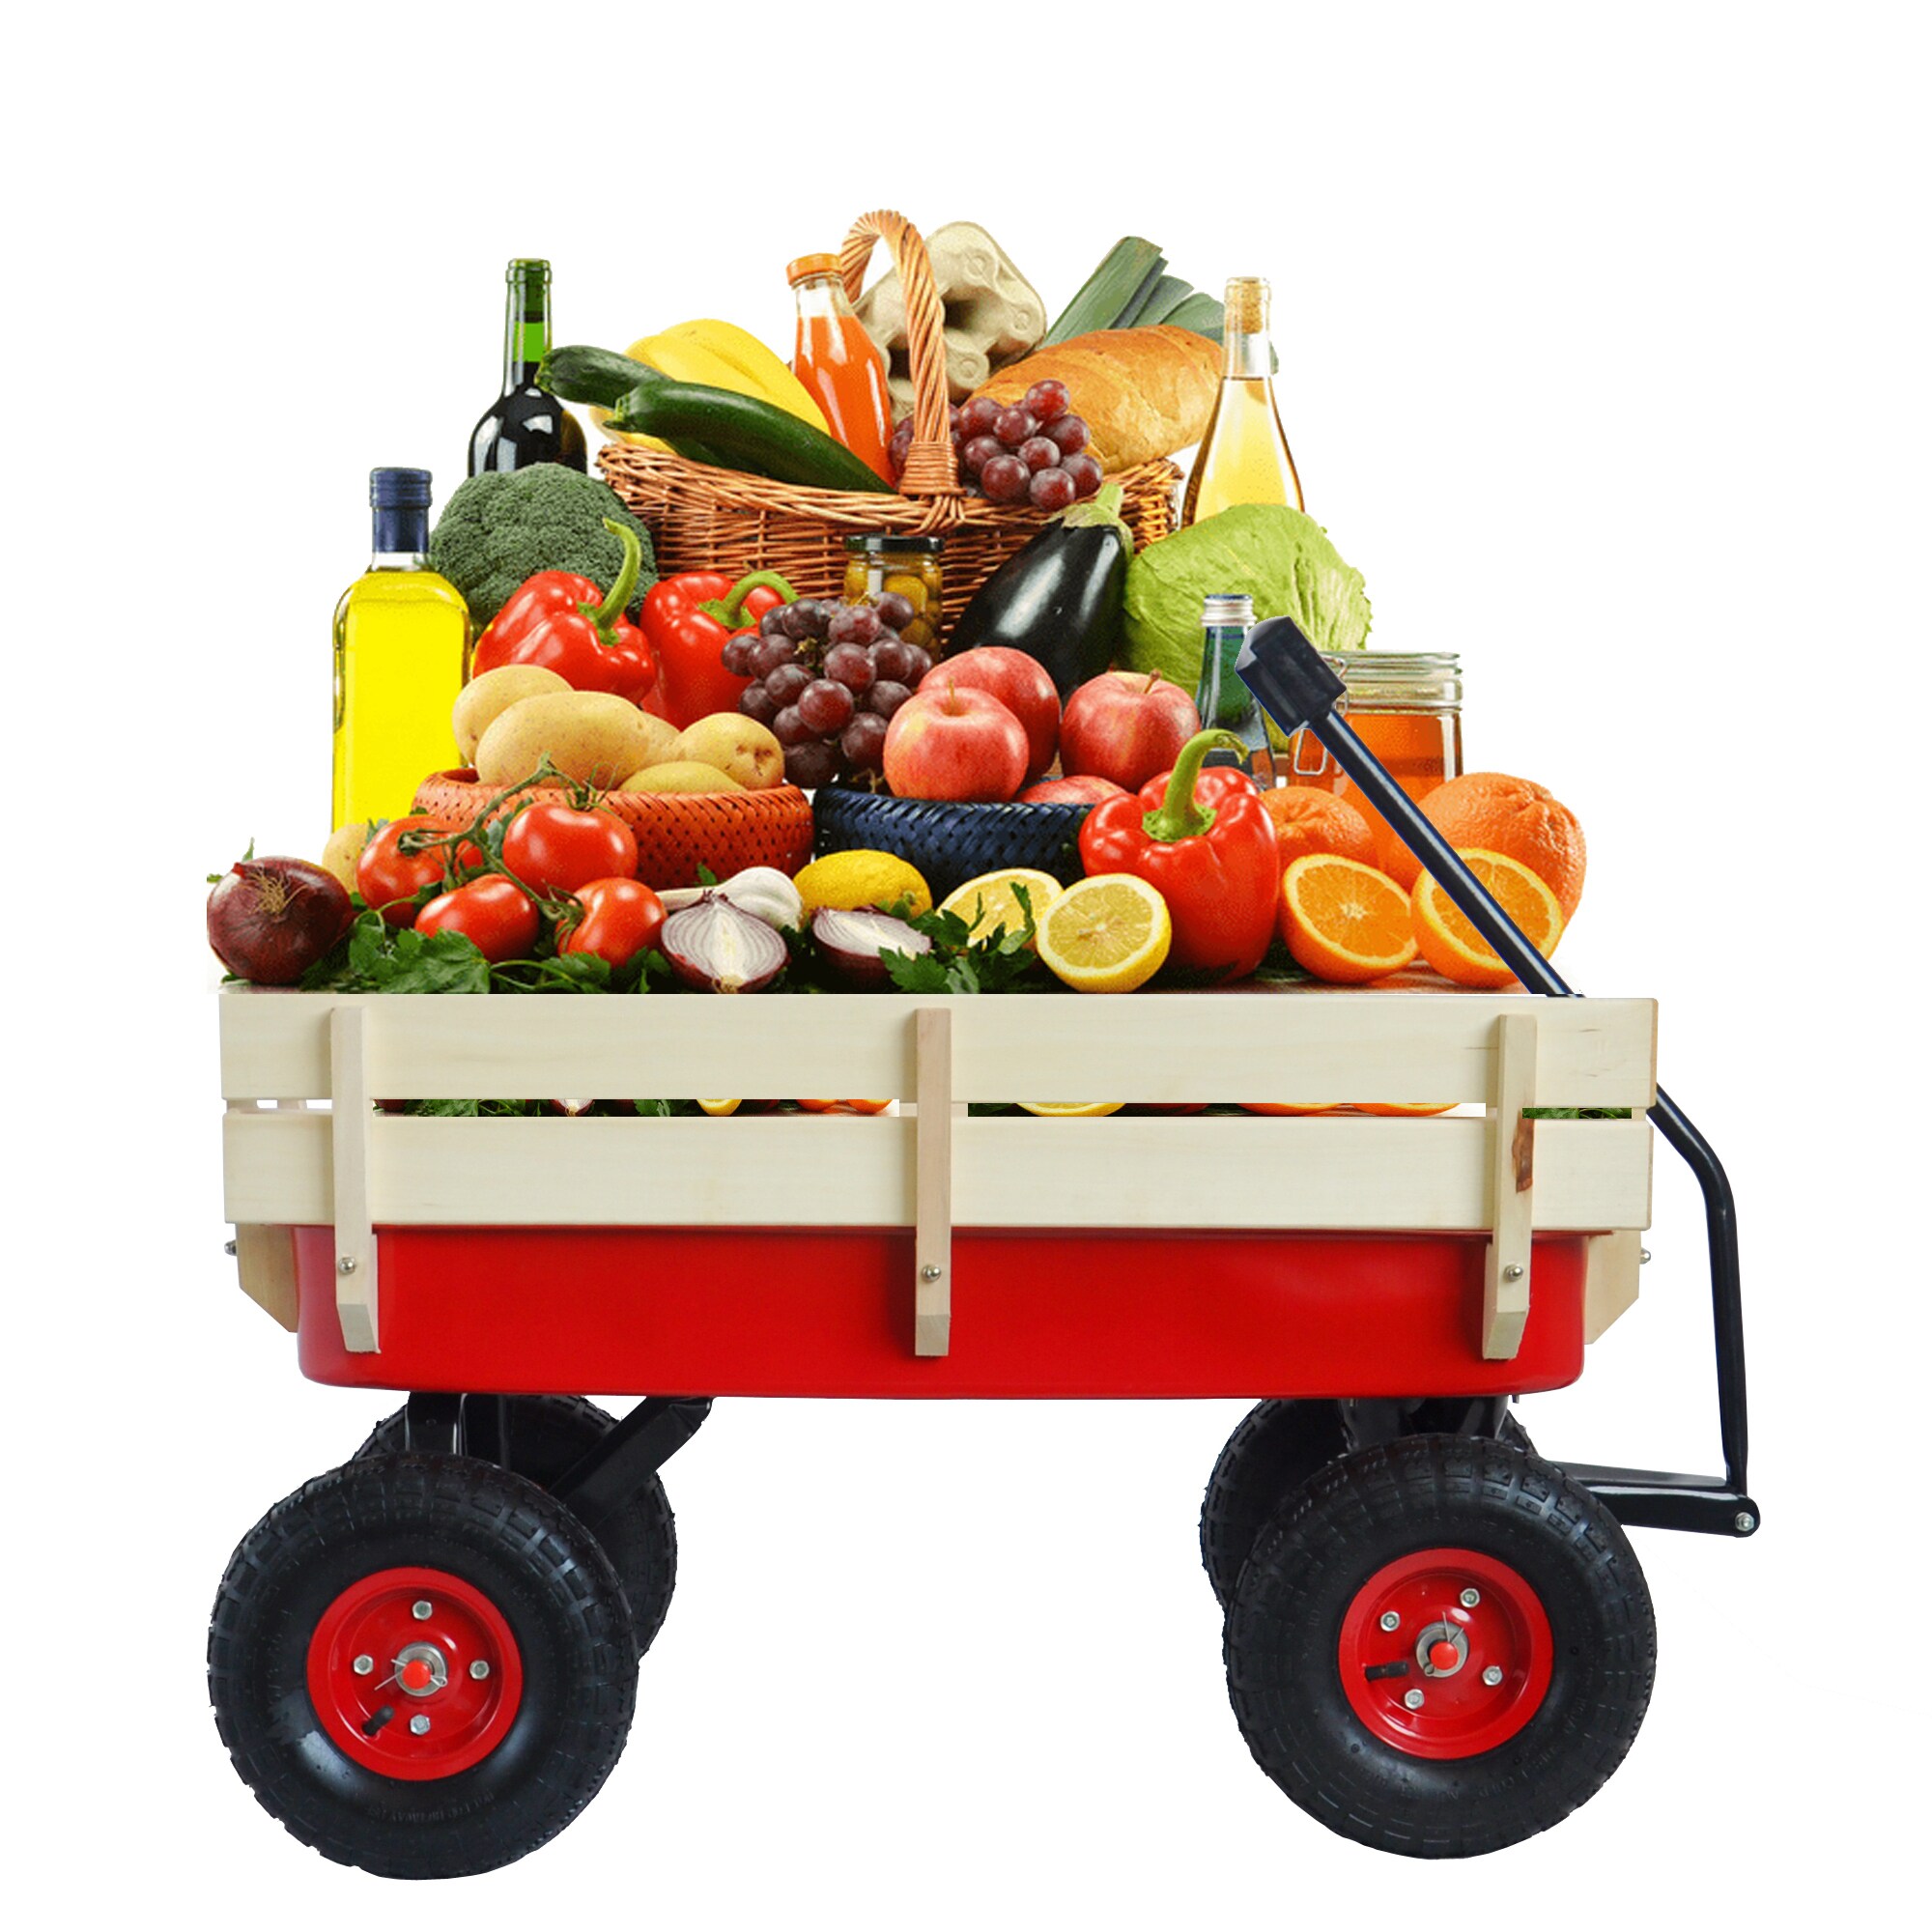 Maocao Hoom Red Steel Garden Cart with 330 lbs. Load Capacity and ...